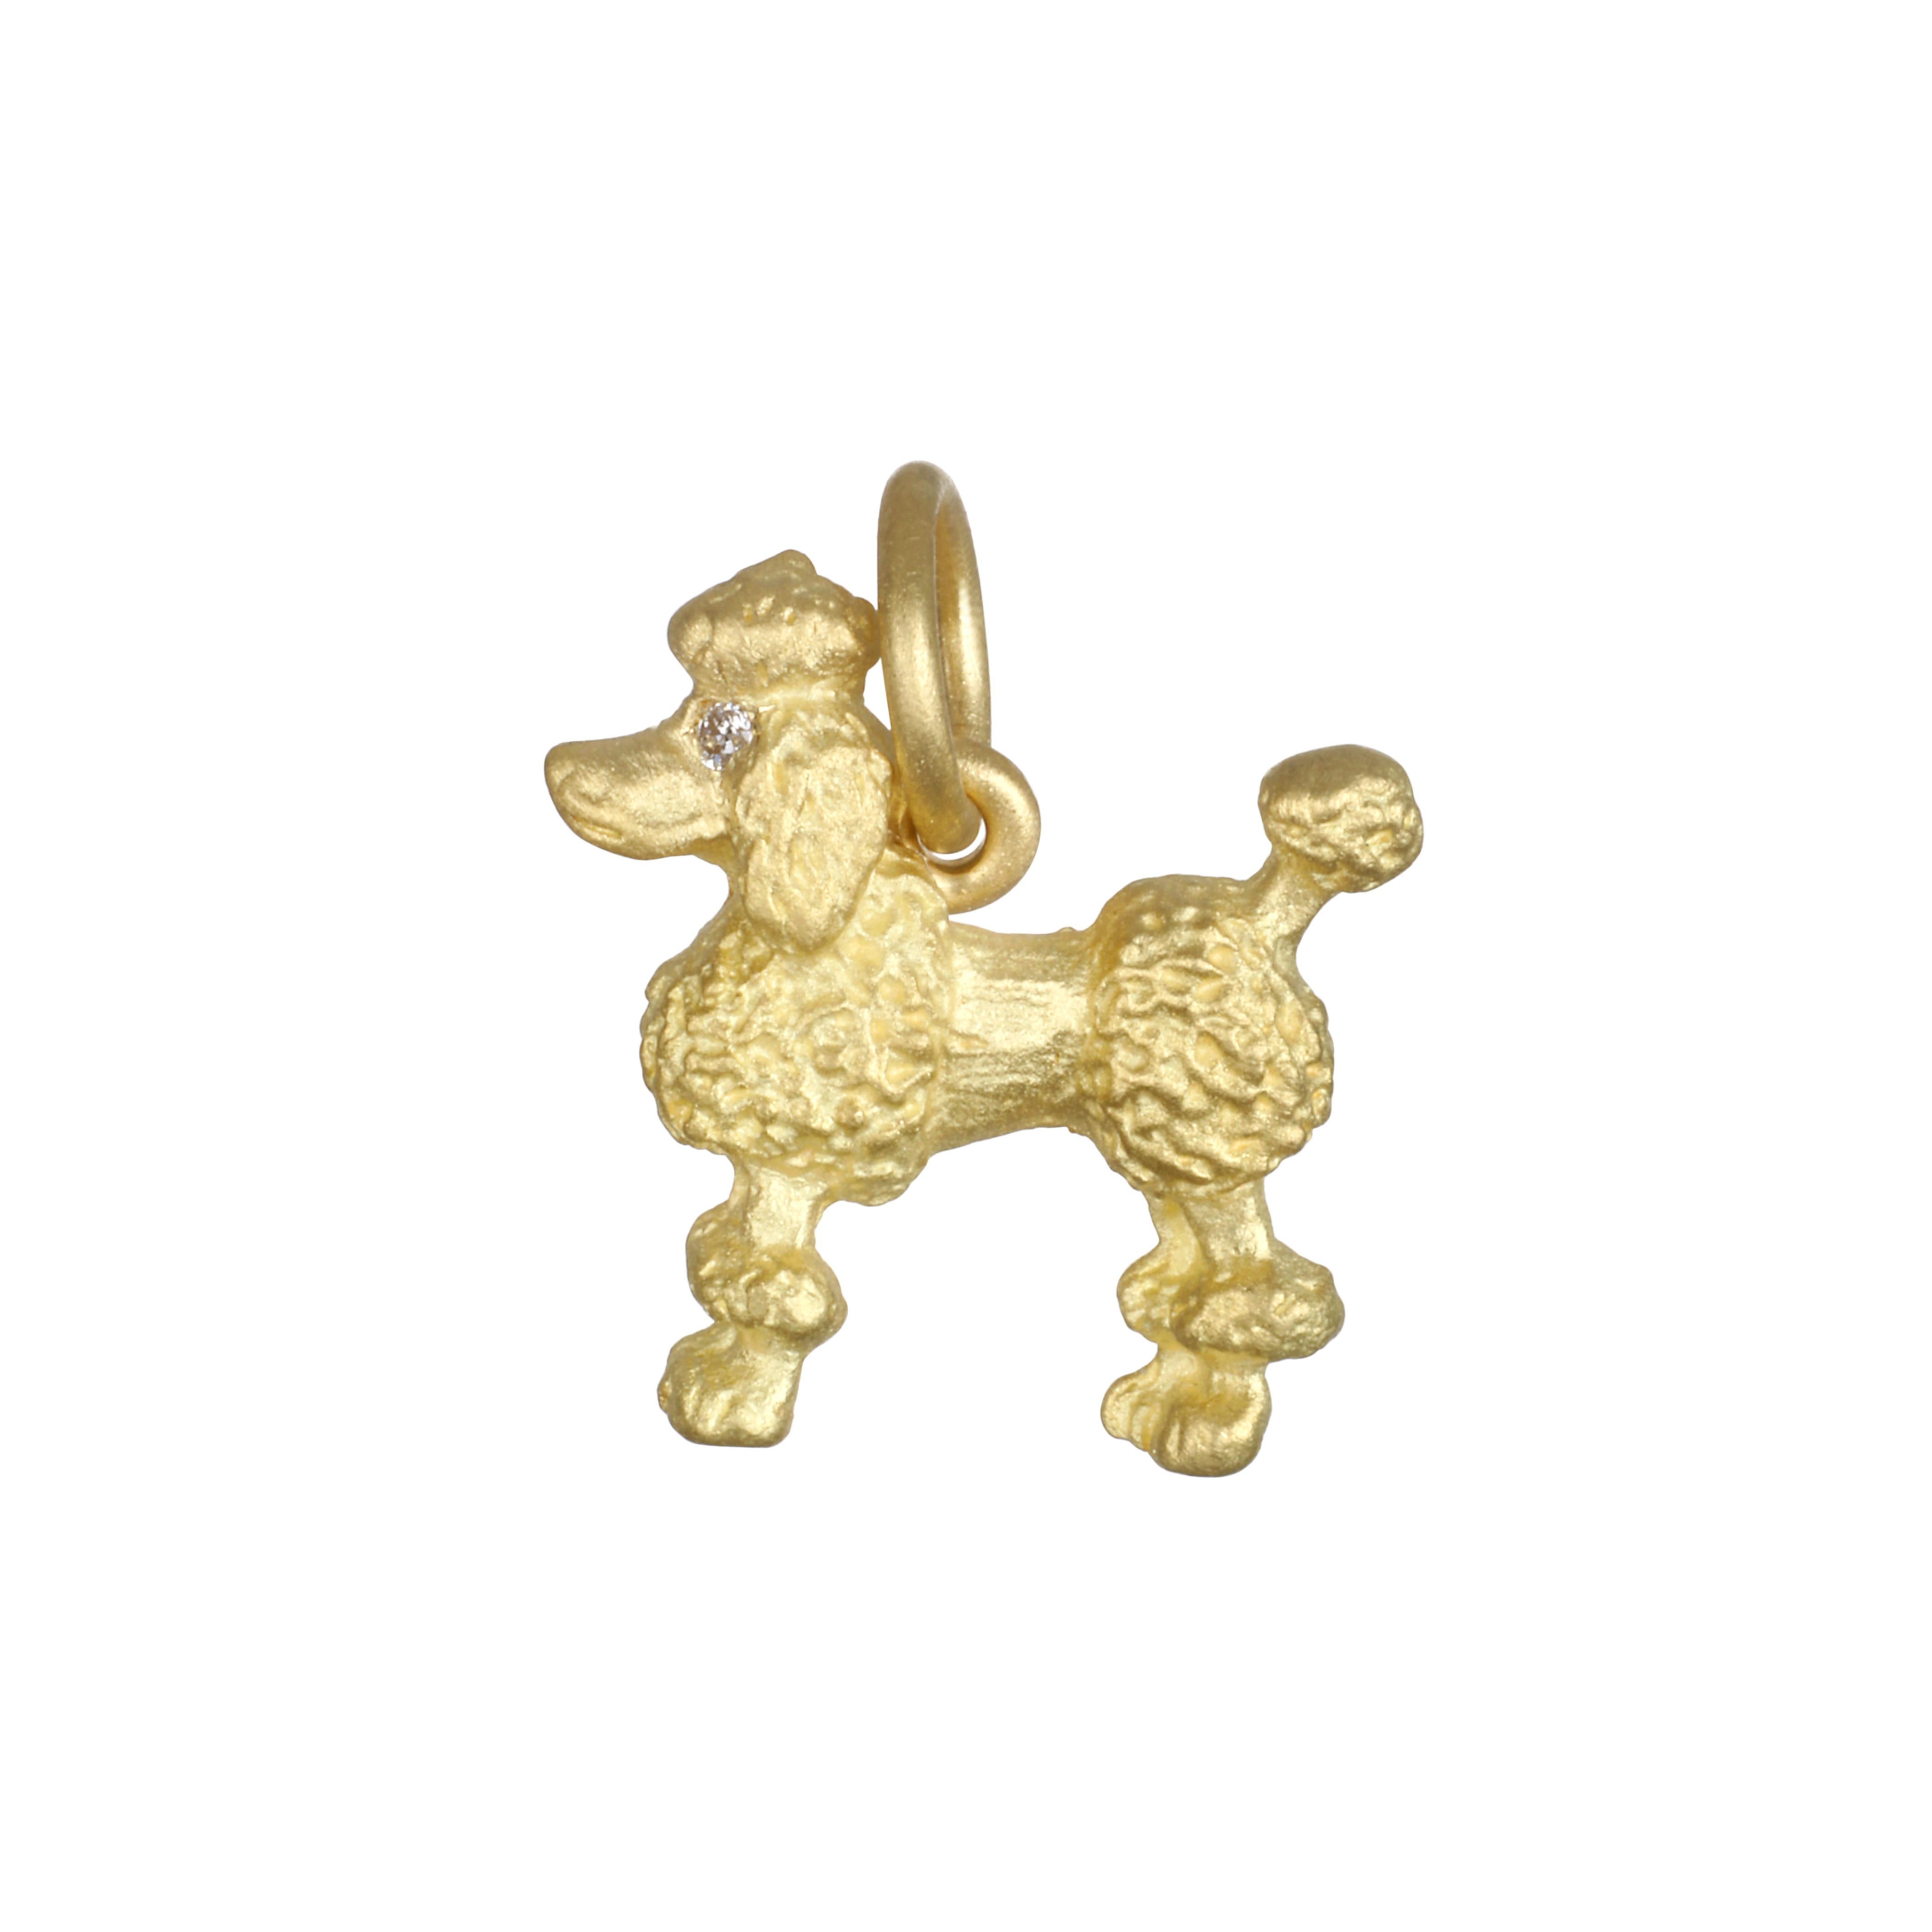 Poodle lovers - Show your love for their intelligent, reliable and affectionate nature. Faye Kim's Poodle charm in 18k gold sparkles with a diamond eye and pom-poms.

Charm Length x Width:  .5